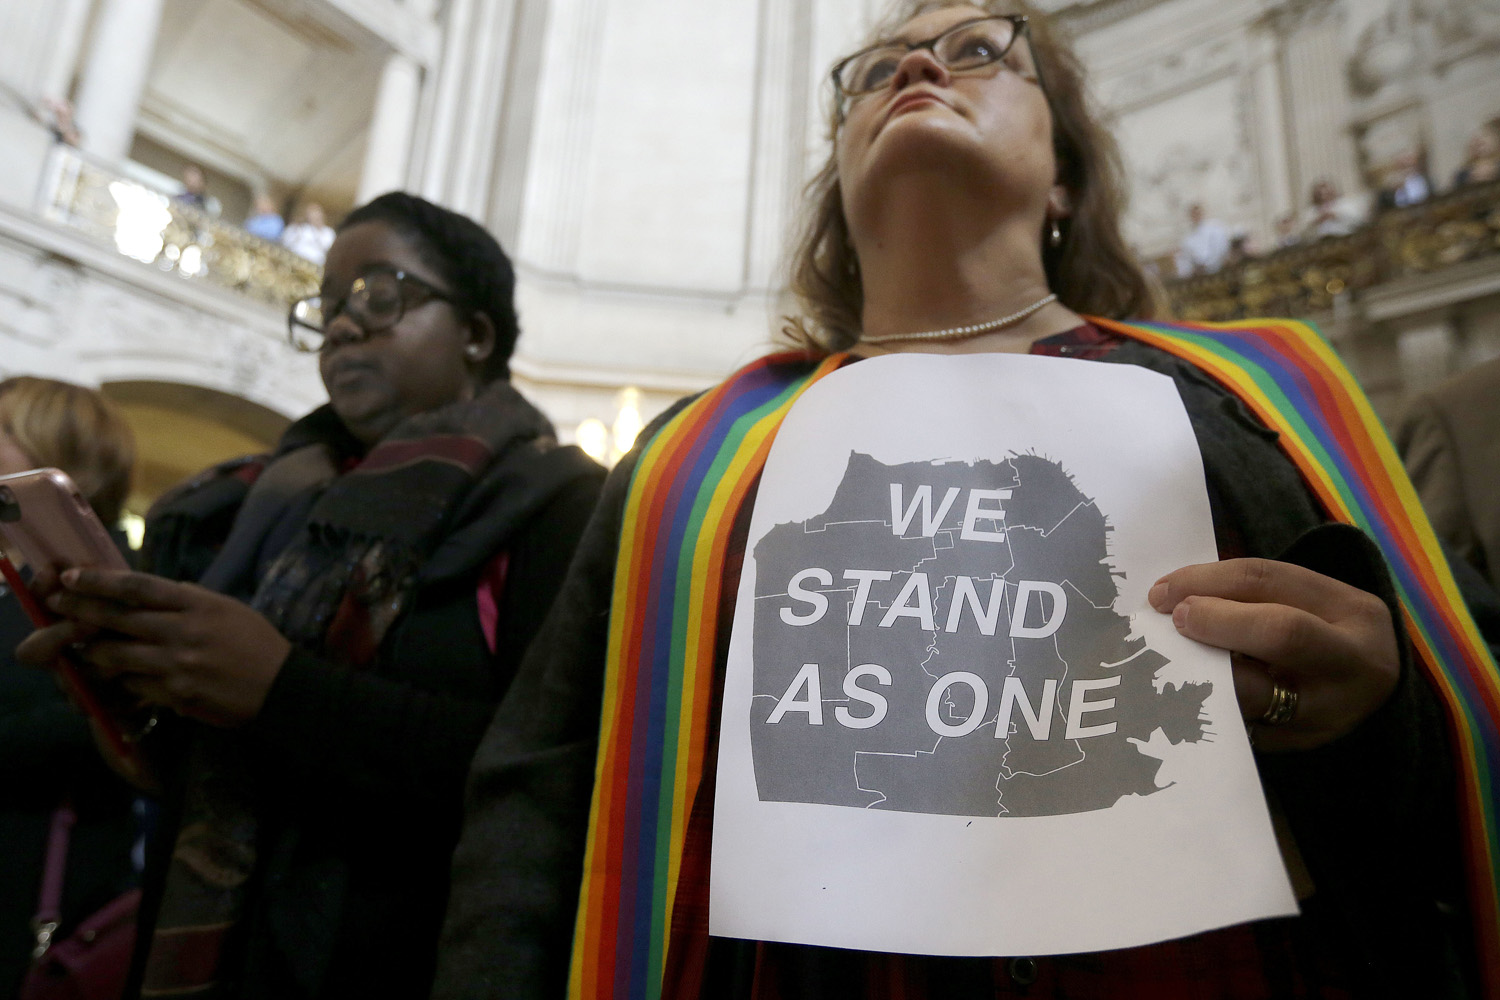 In this file photo, The Rev. Annie Steinberg-Behrman, right, provisional pastor with Metropolitan Community Church, holds a sign while listening to speakers at a meeting at City Hall in San Francisco by city leaders and community activists to reaffirm the city's commitment to being a sanctuary city. (Jeff Chiu/AP)